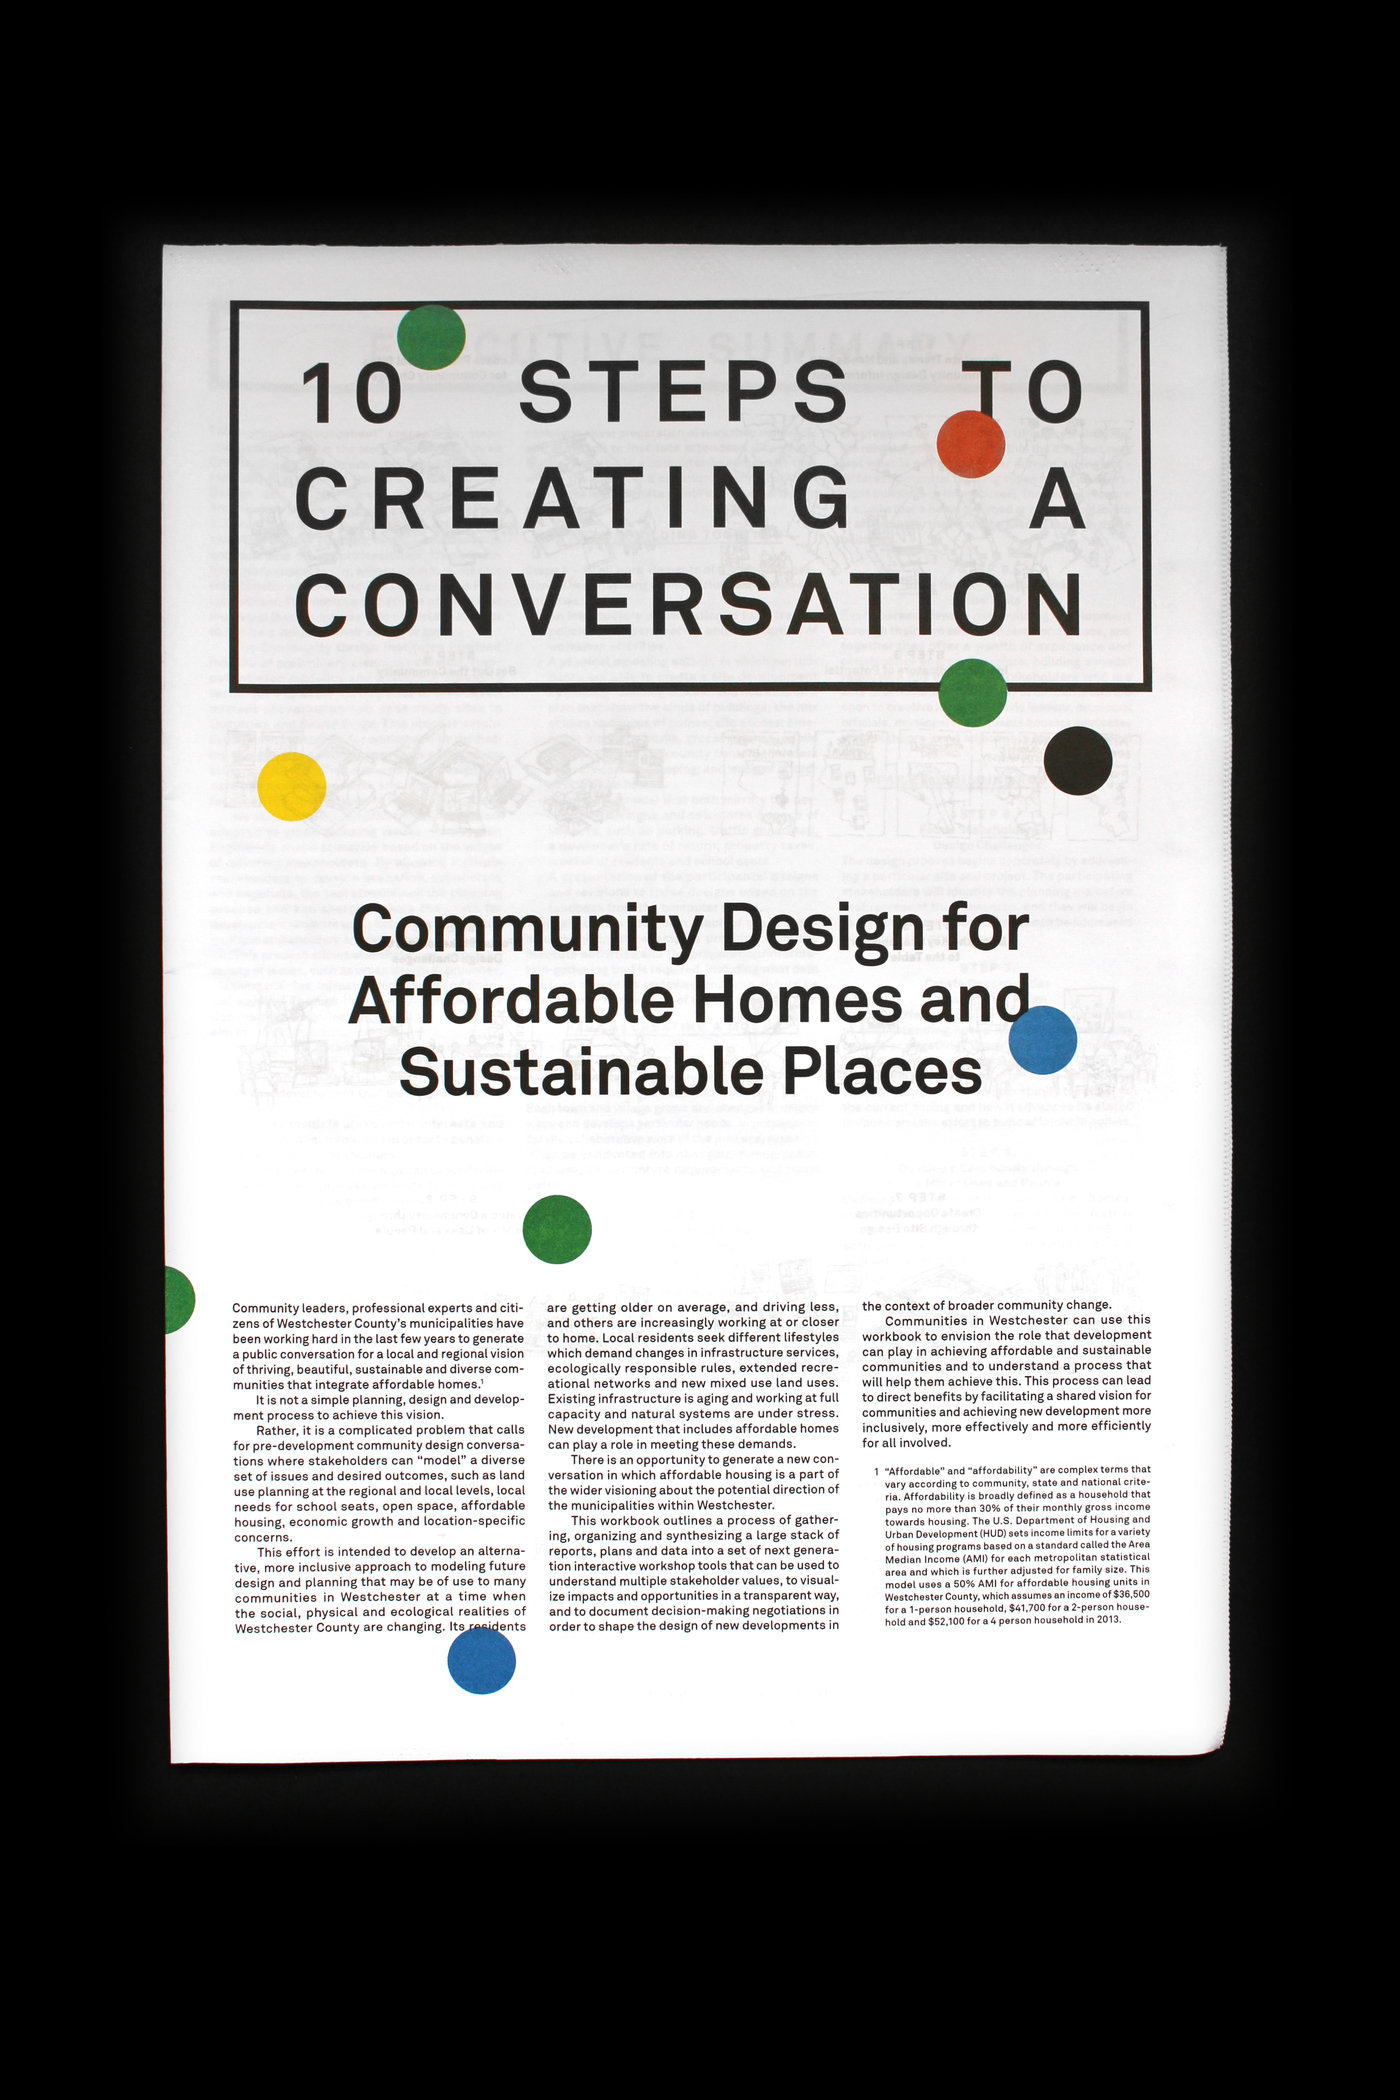 Community Design for Affordable Homes and Sustainable Places